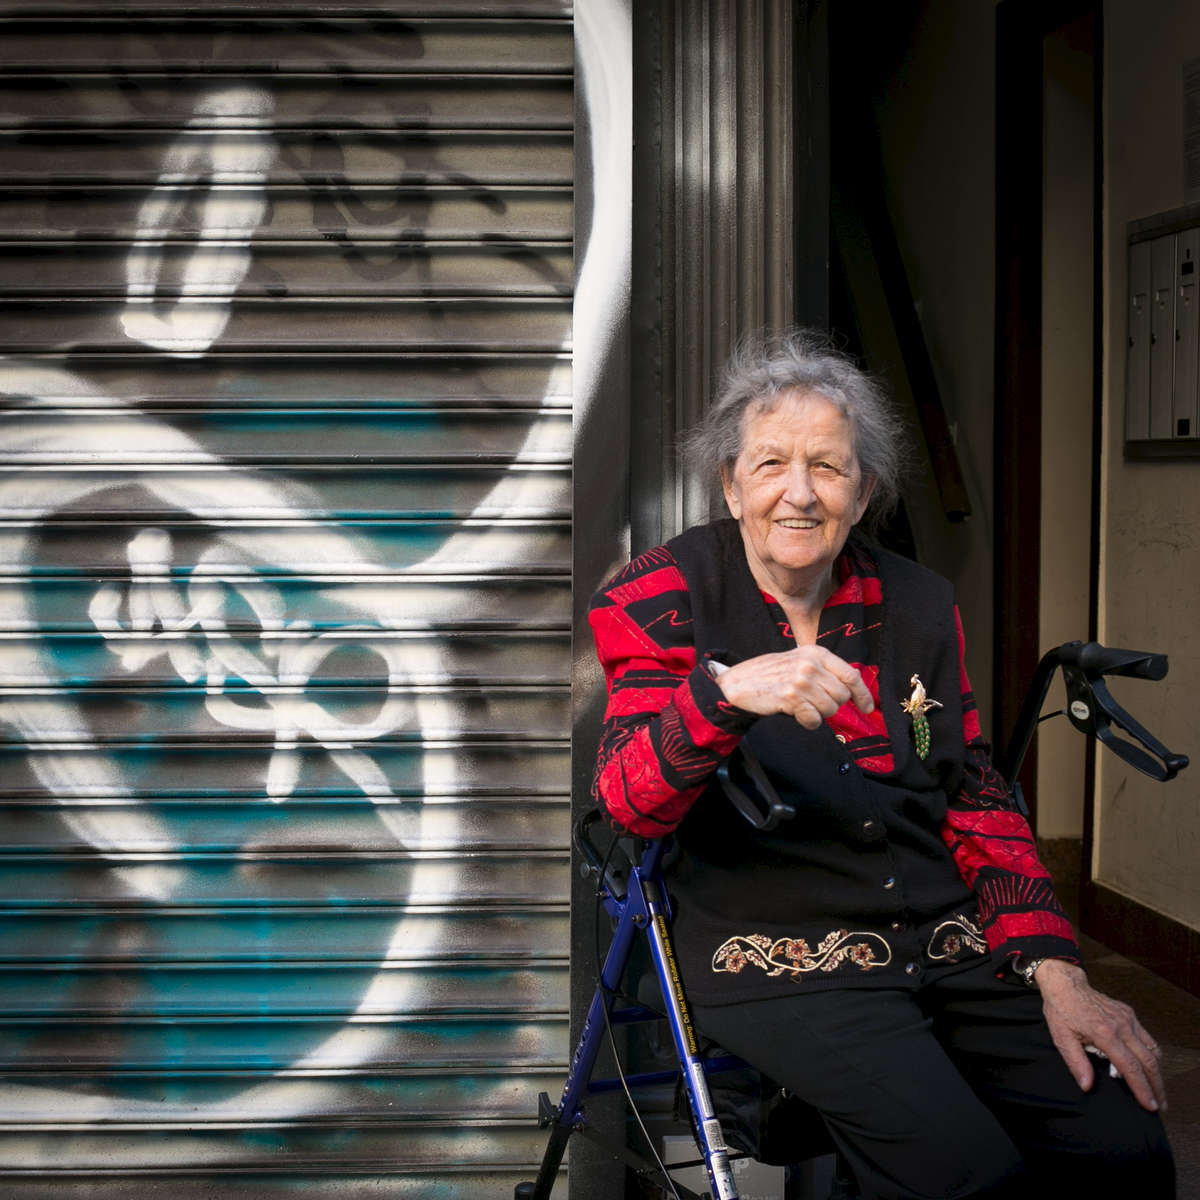 Rose, an immigrant from Malta sits outside her 5th floor walk up where she has lived for the last 64 years on E 4th street in the east village. She raised her 7 children in this apartment, many of whom moved to NJ. The storefront where she sits used to be a meat market until the neighbors sued due to middle of the night noisy deliveries, and had the store shut down.